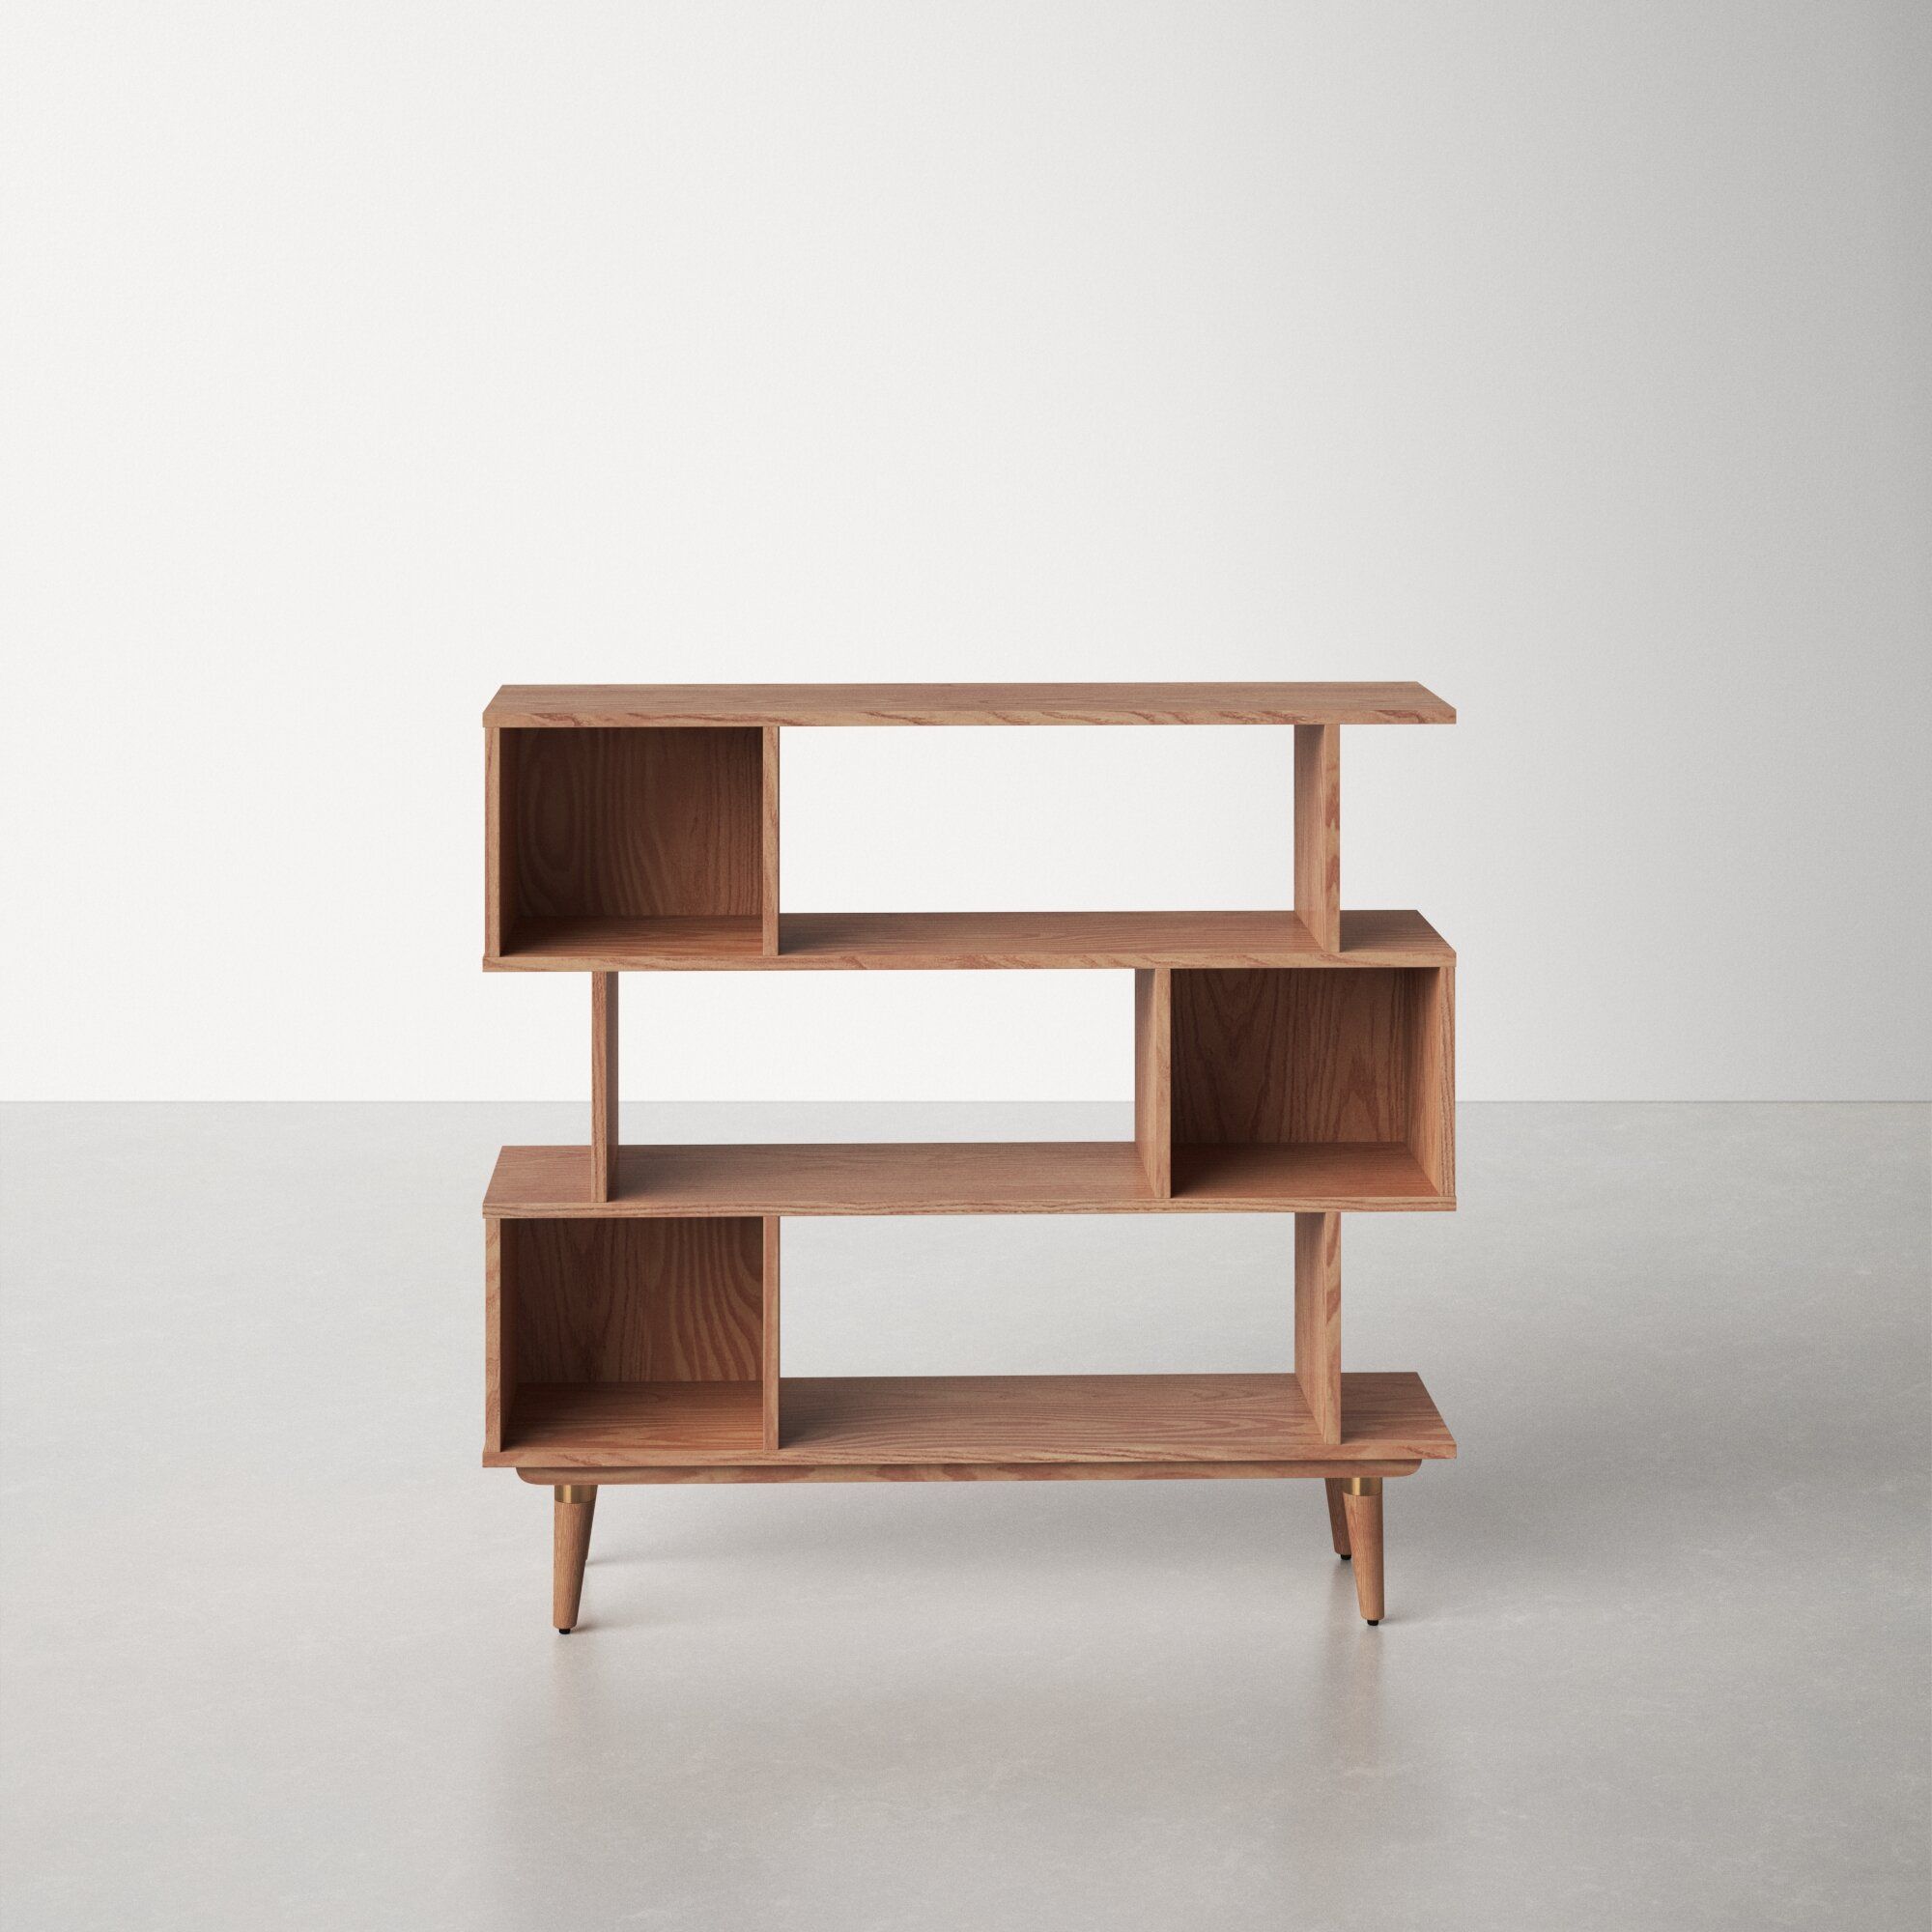 Harmon Geometric Bookcase | Allmodern Within Geometric Bookcases (View 7 of 15)